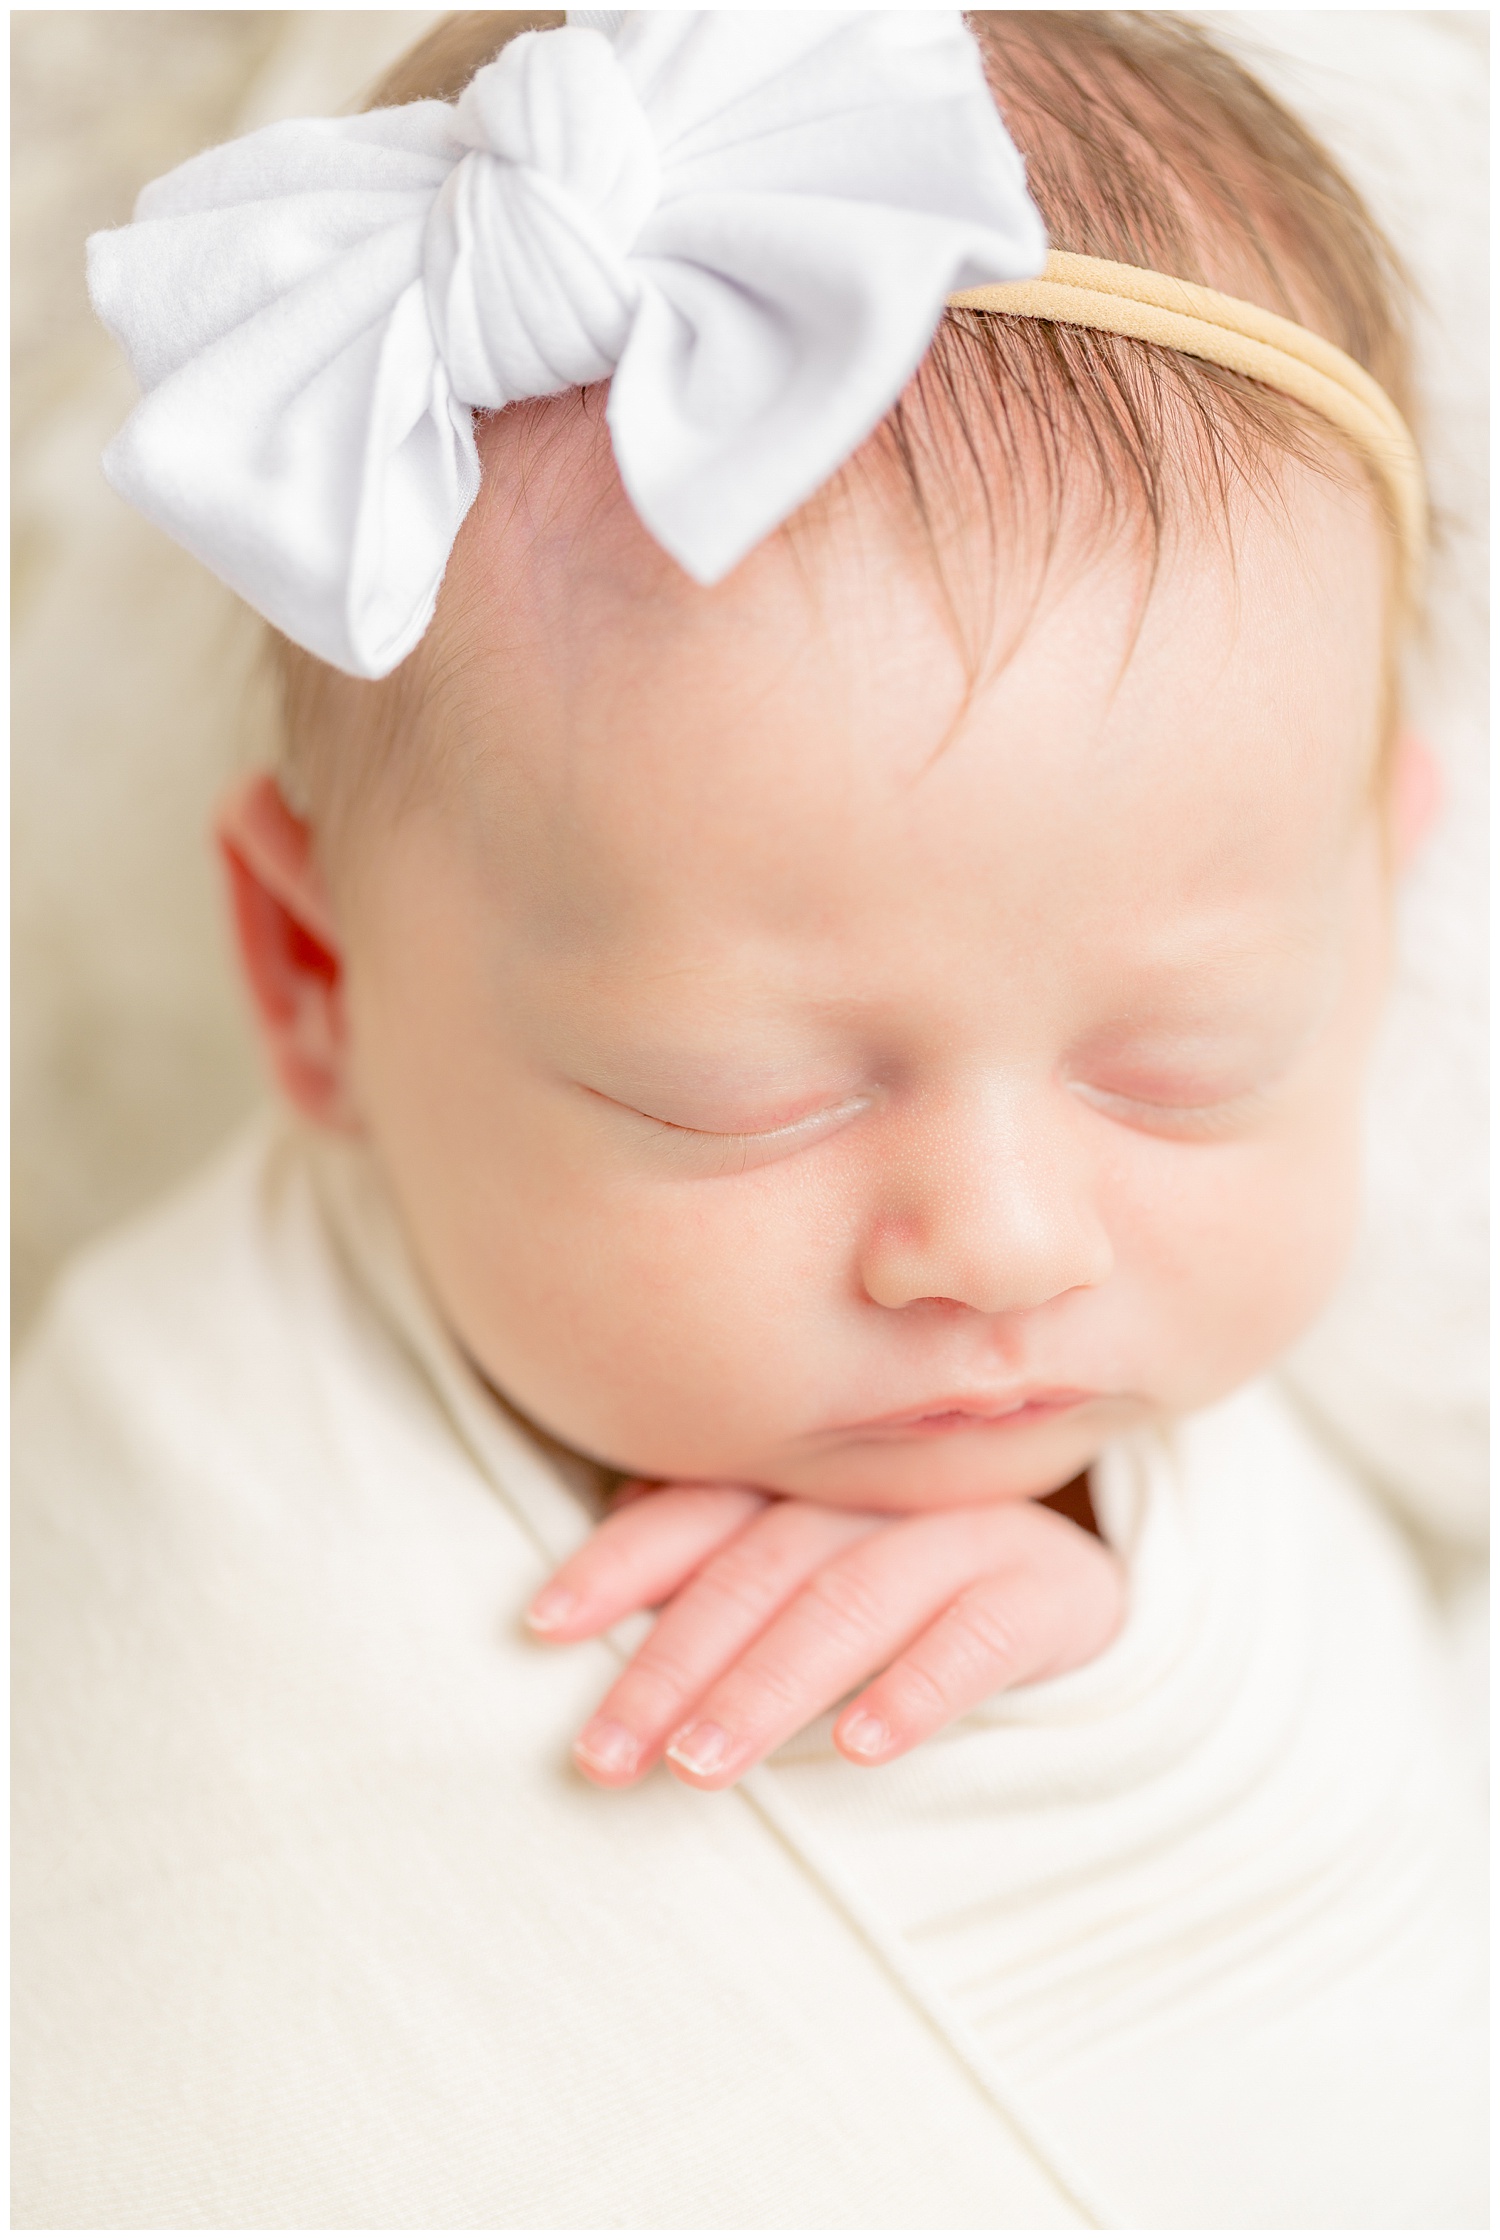 Newborn baby girl wrapped in ivory stretch fabric resting her chin gently on her hand while wearing a white bow headband. | CB Studio